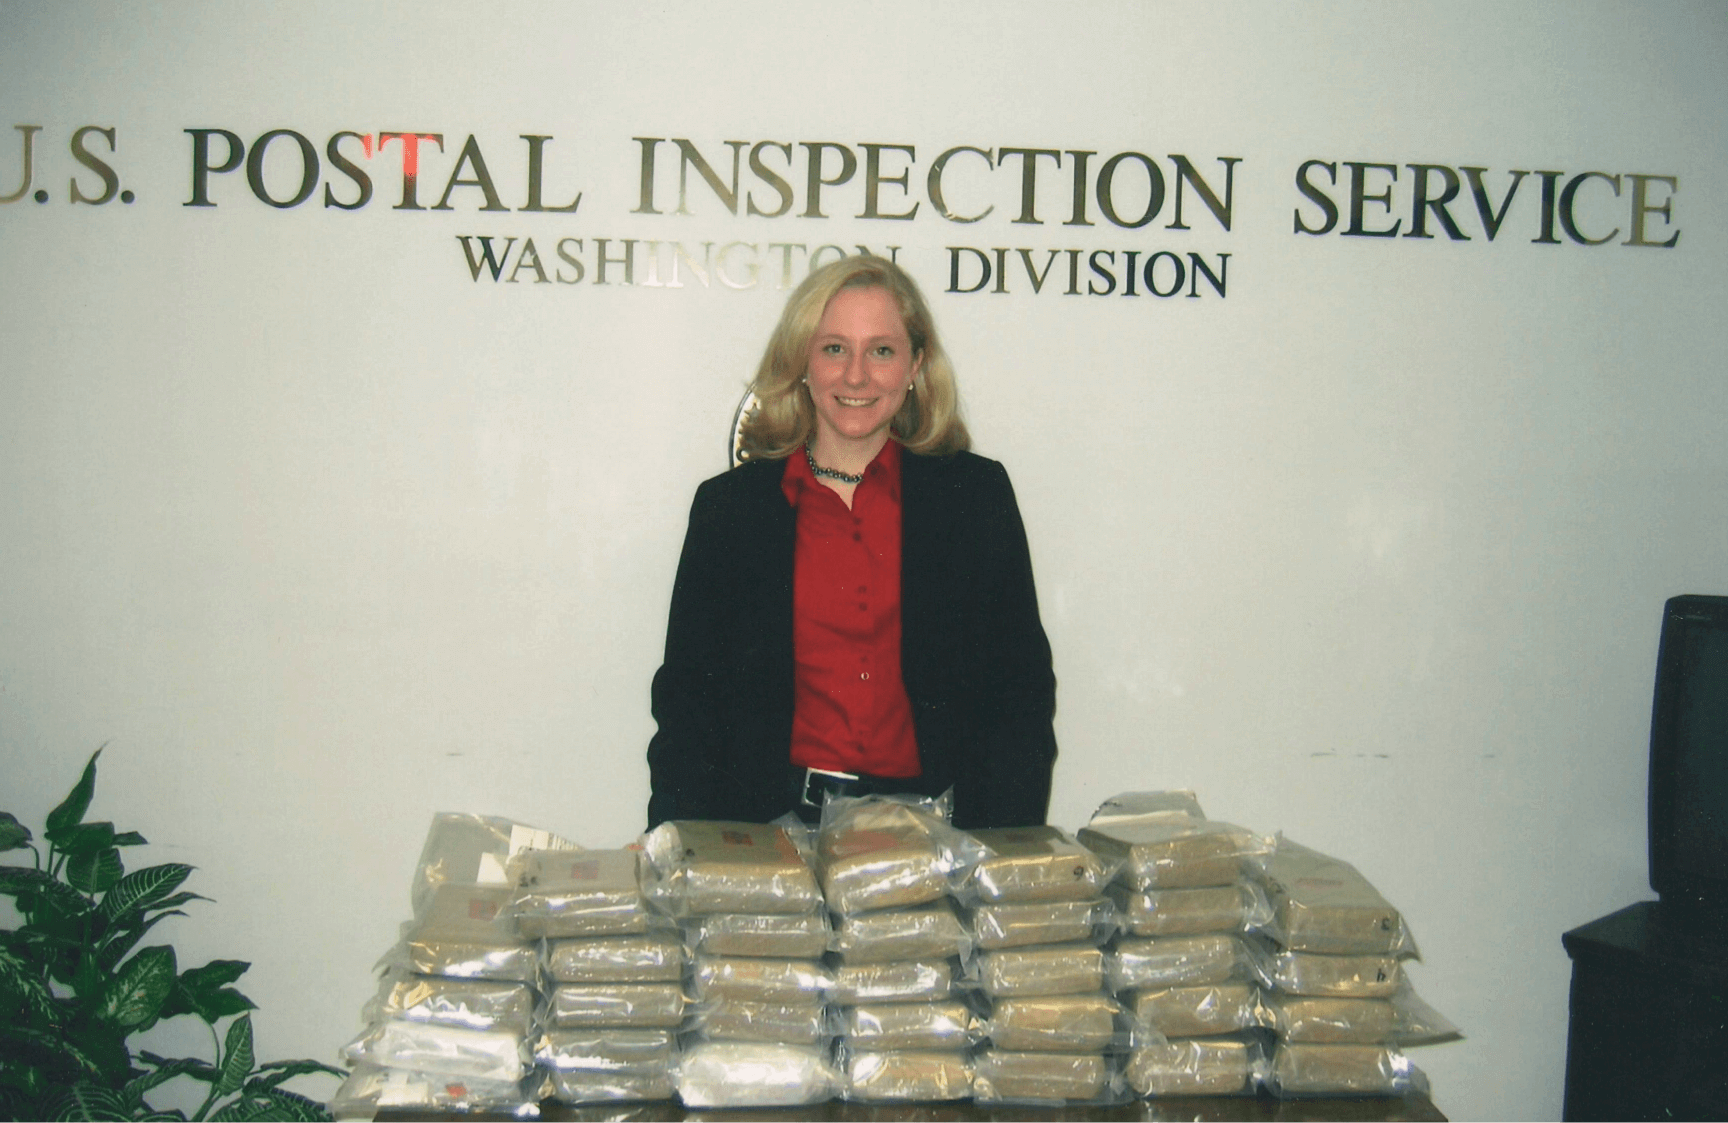 Abigail Spanberger's public service career began as a federal law enforcement officer, cracking down on narcotics traffickers and working money laundering cases.